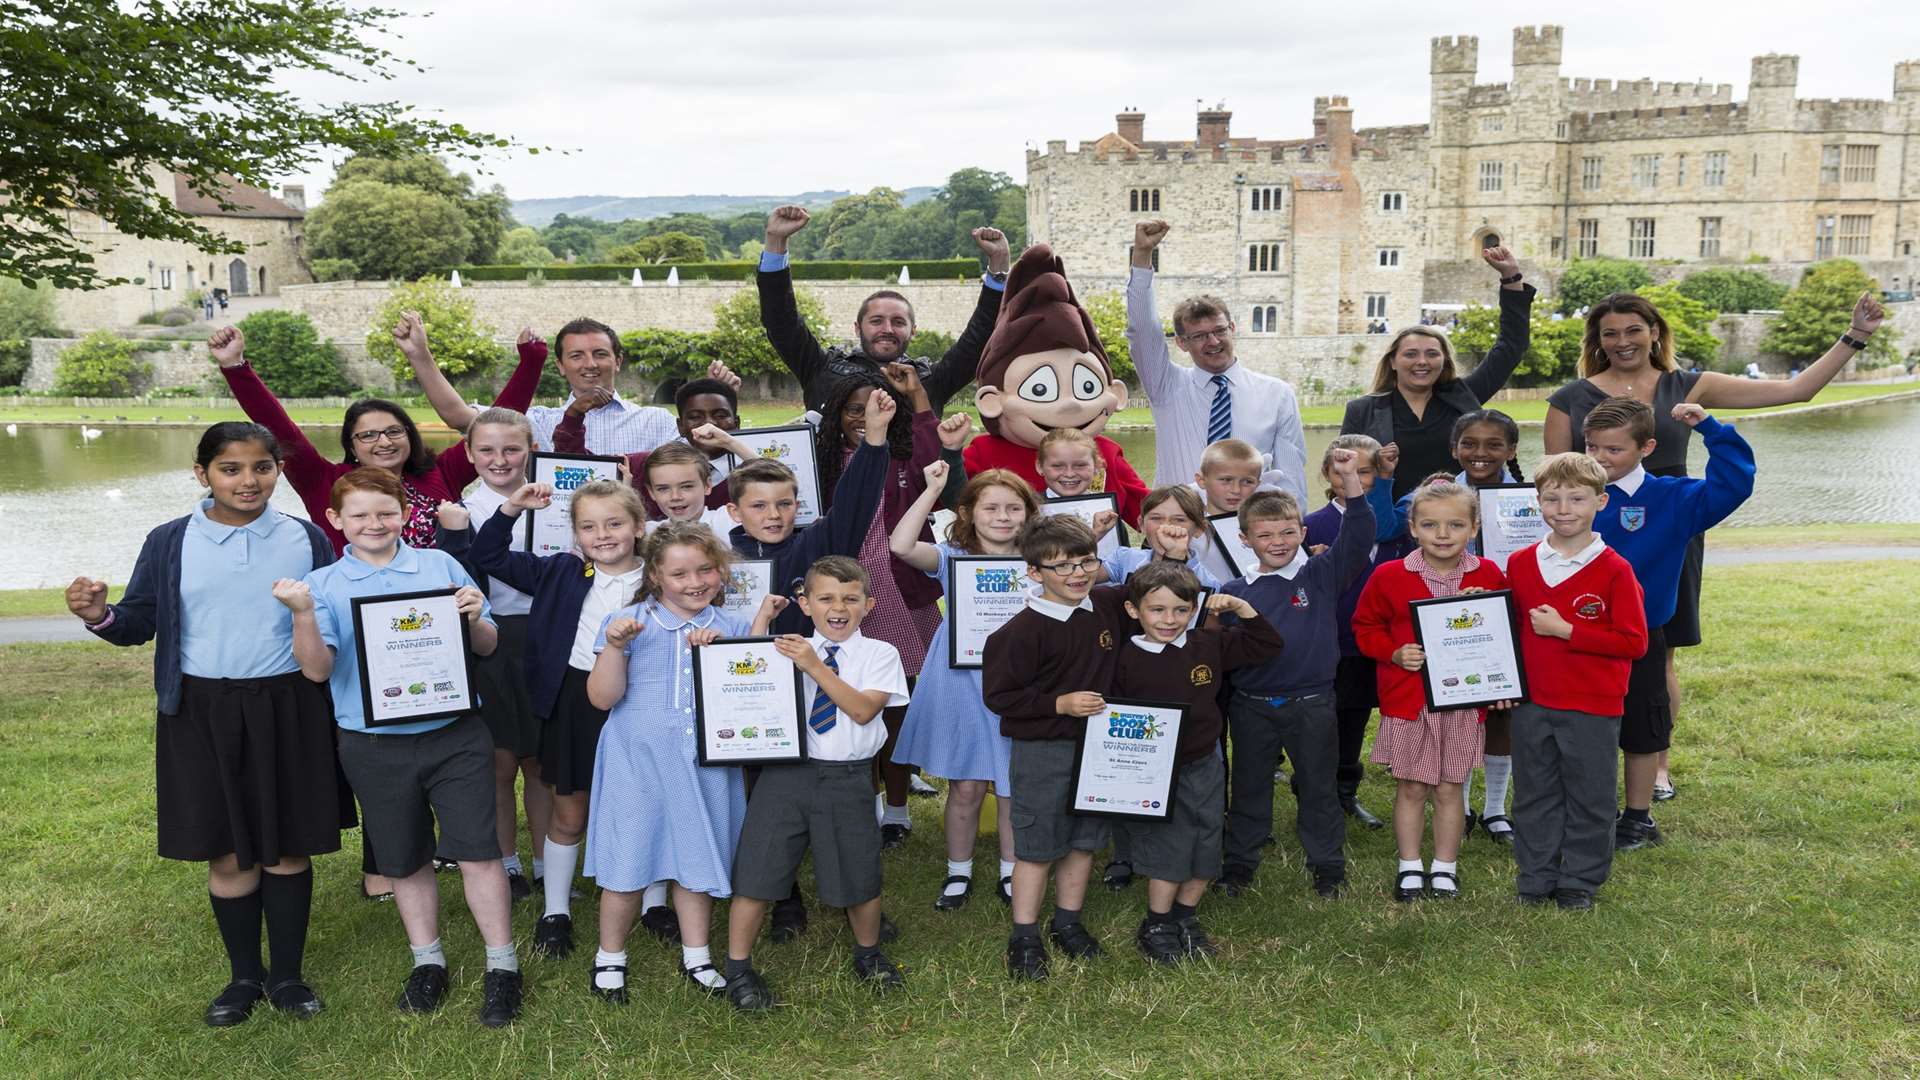 Walk to school and Buster's Book Club winners and supporters at Leeds Castle, Maidstone.